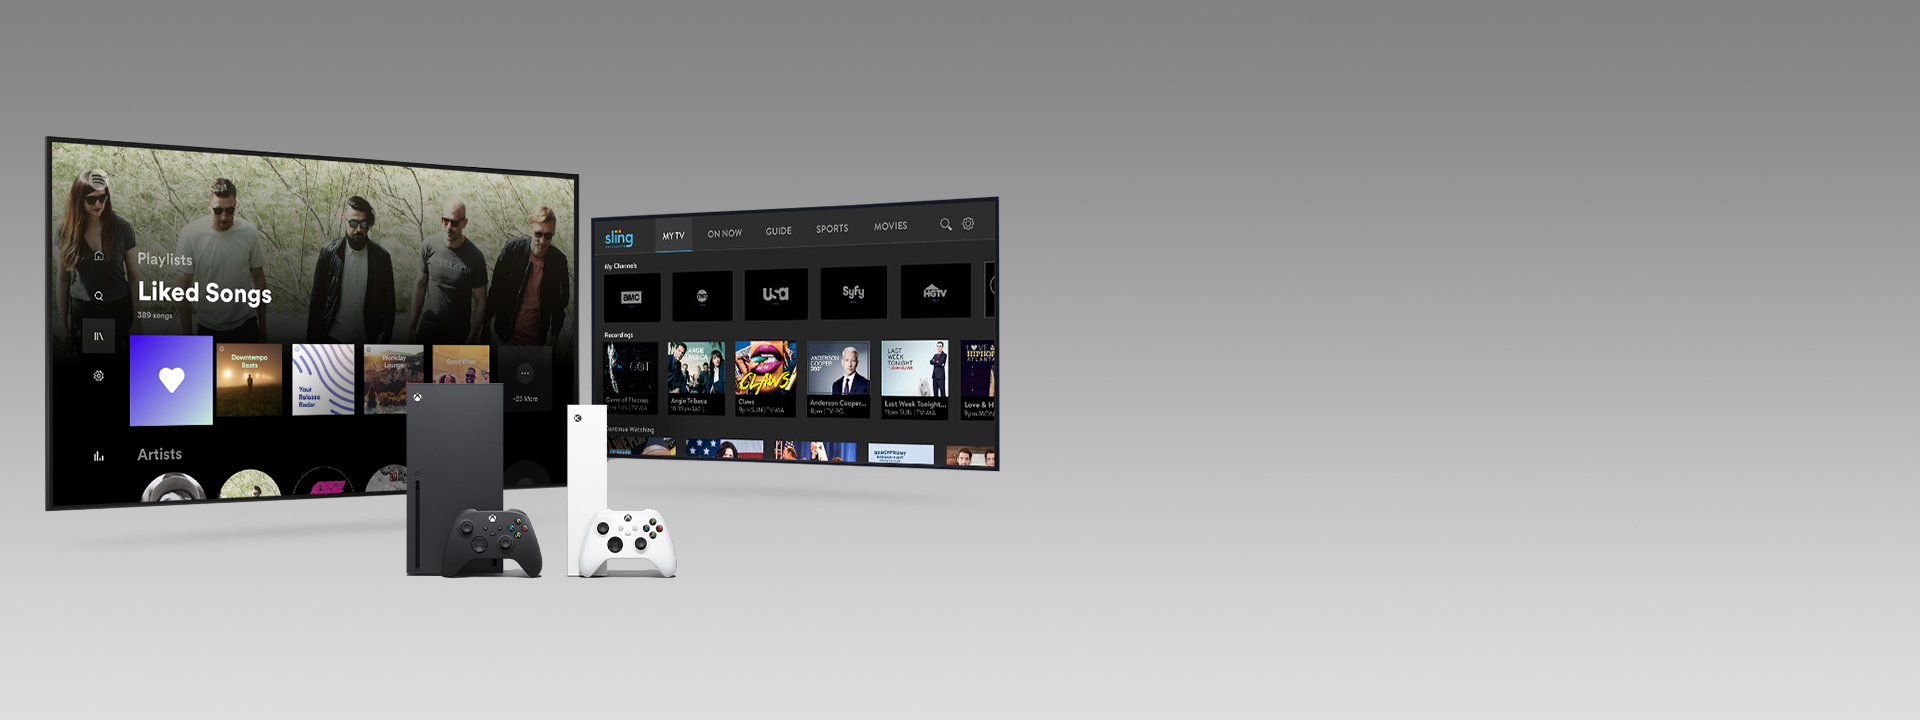 An Xbox Series X and Series S with controllers in front of two television screens featuring app user interfaces.